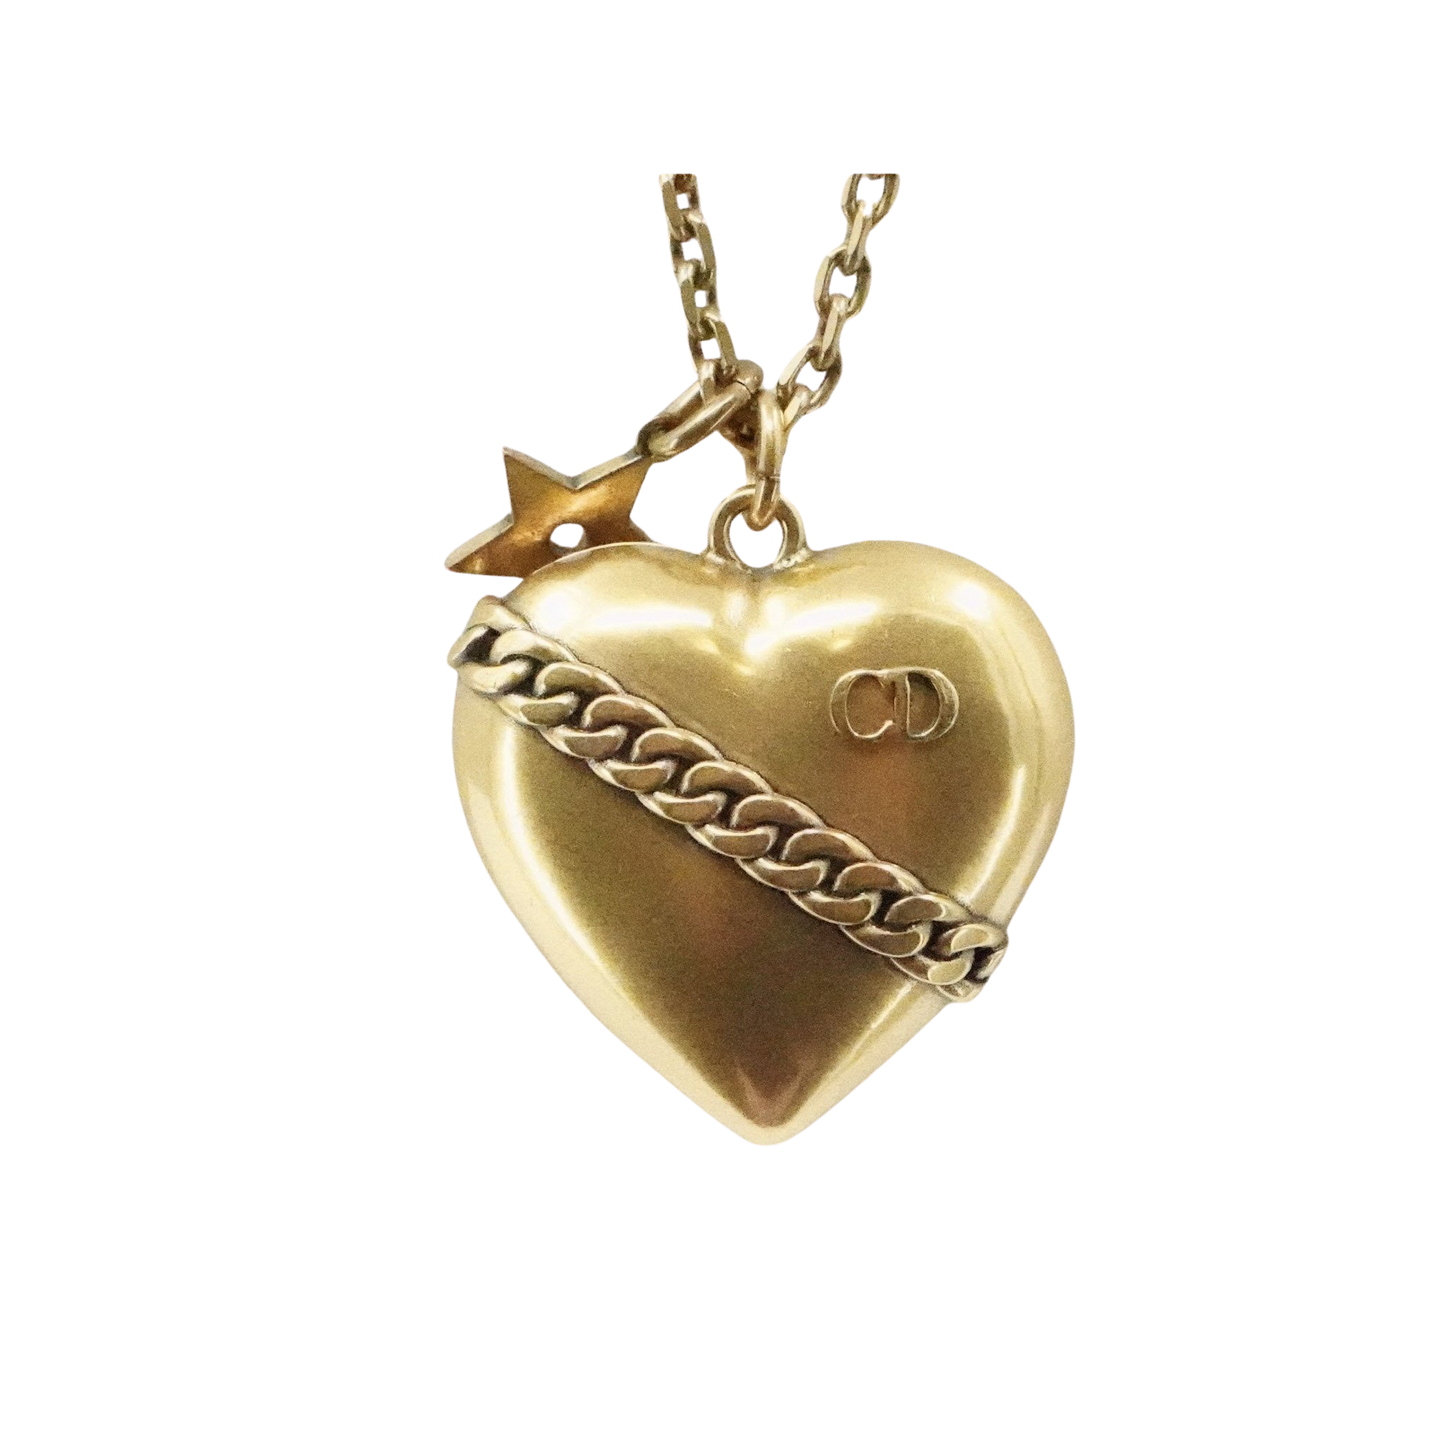 Christian Dior heart necklace